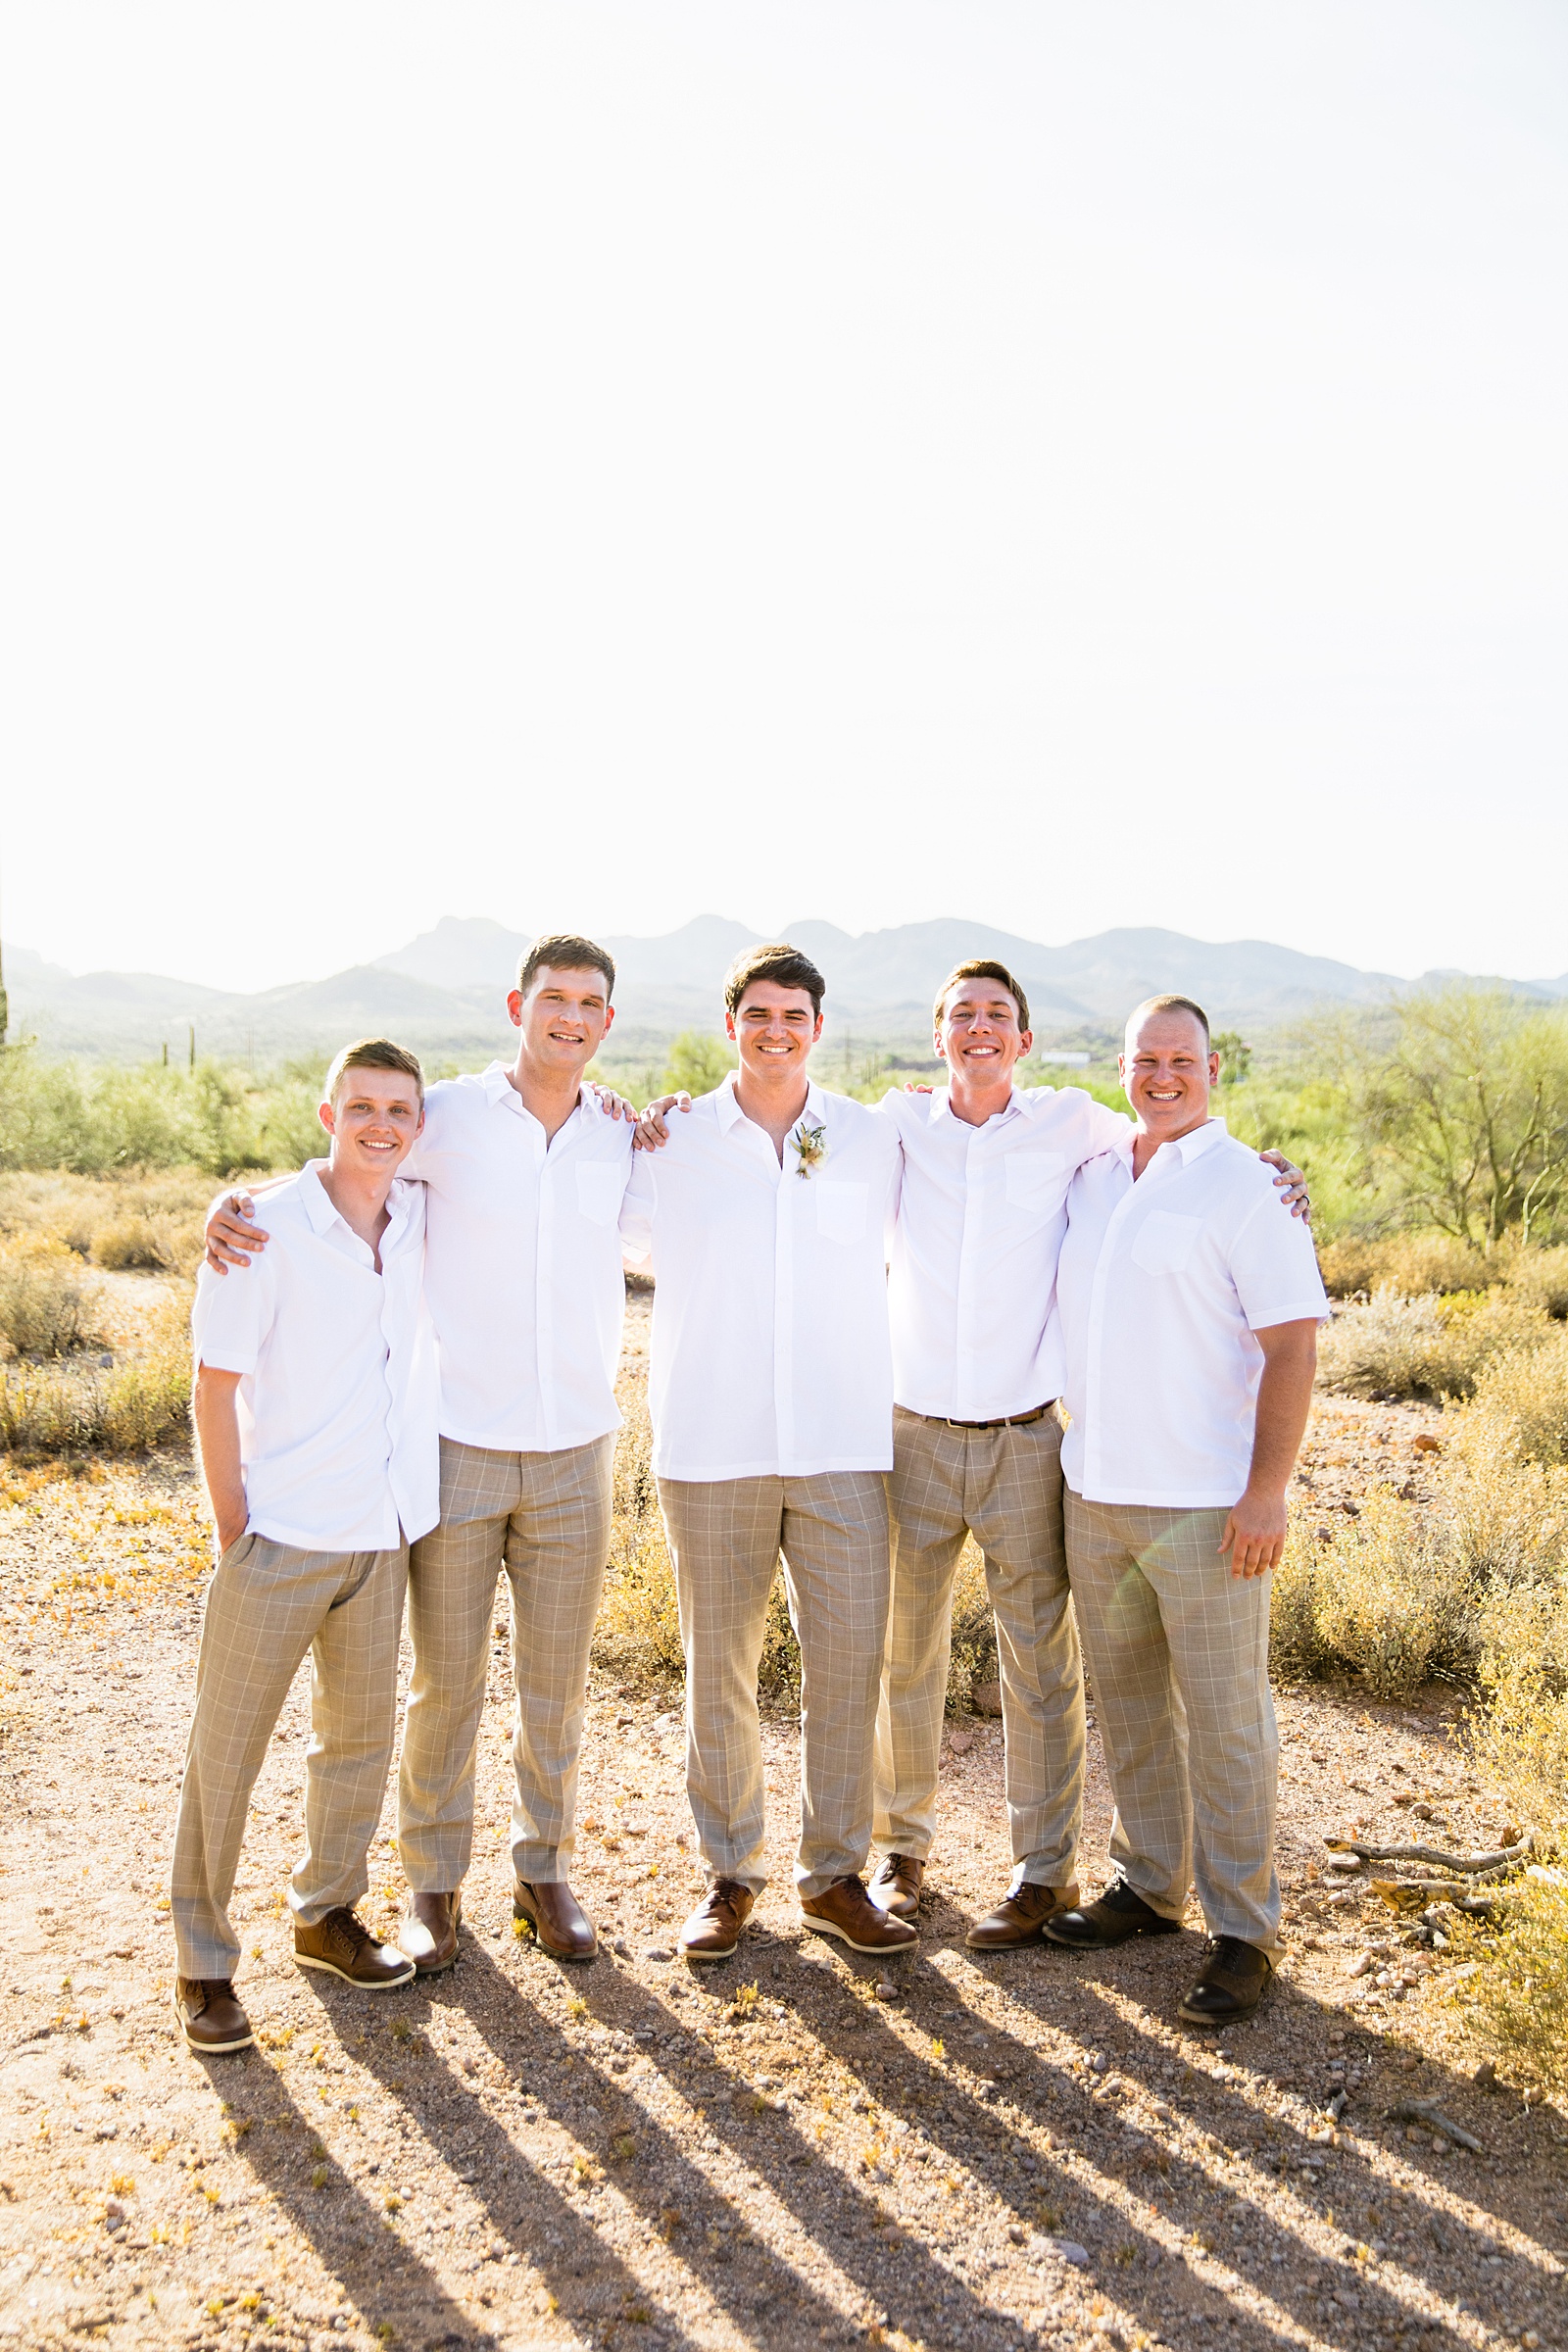 Groom and groomsmen together at a Superstition Mountain Micro wedding by Arizona wedding photographer PMA Photography.